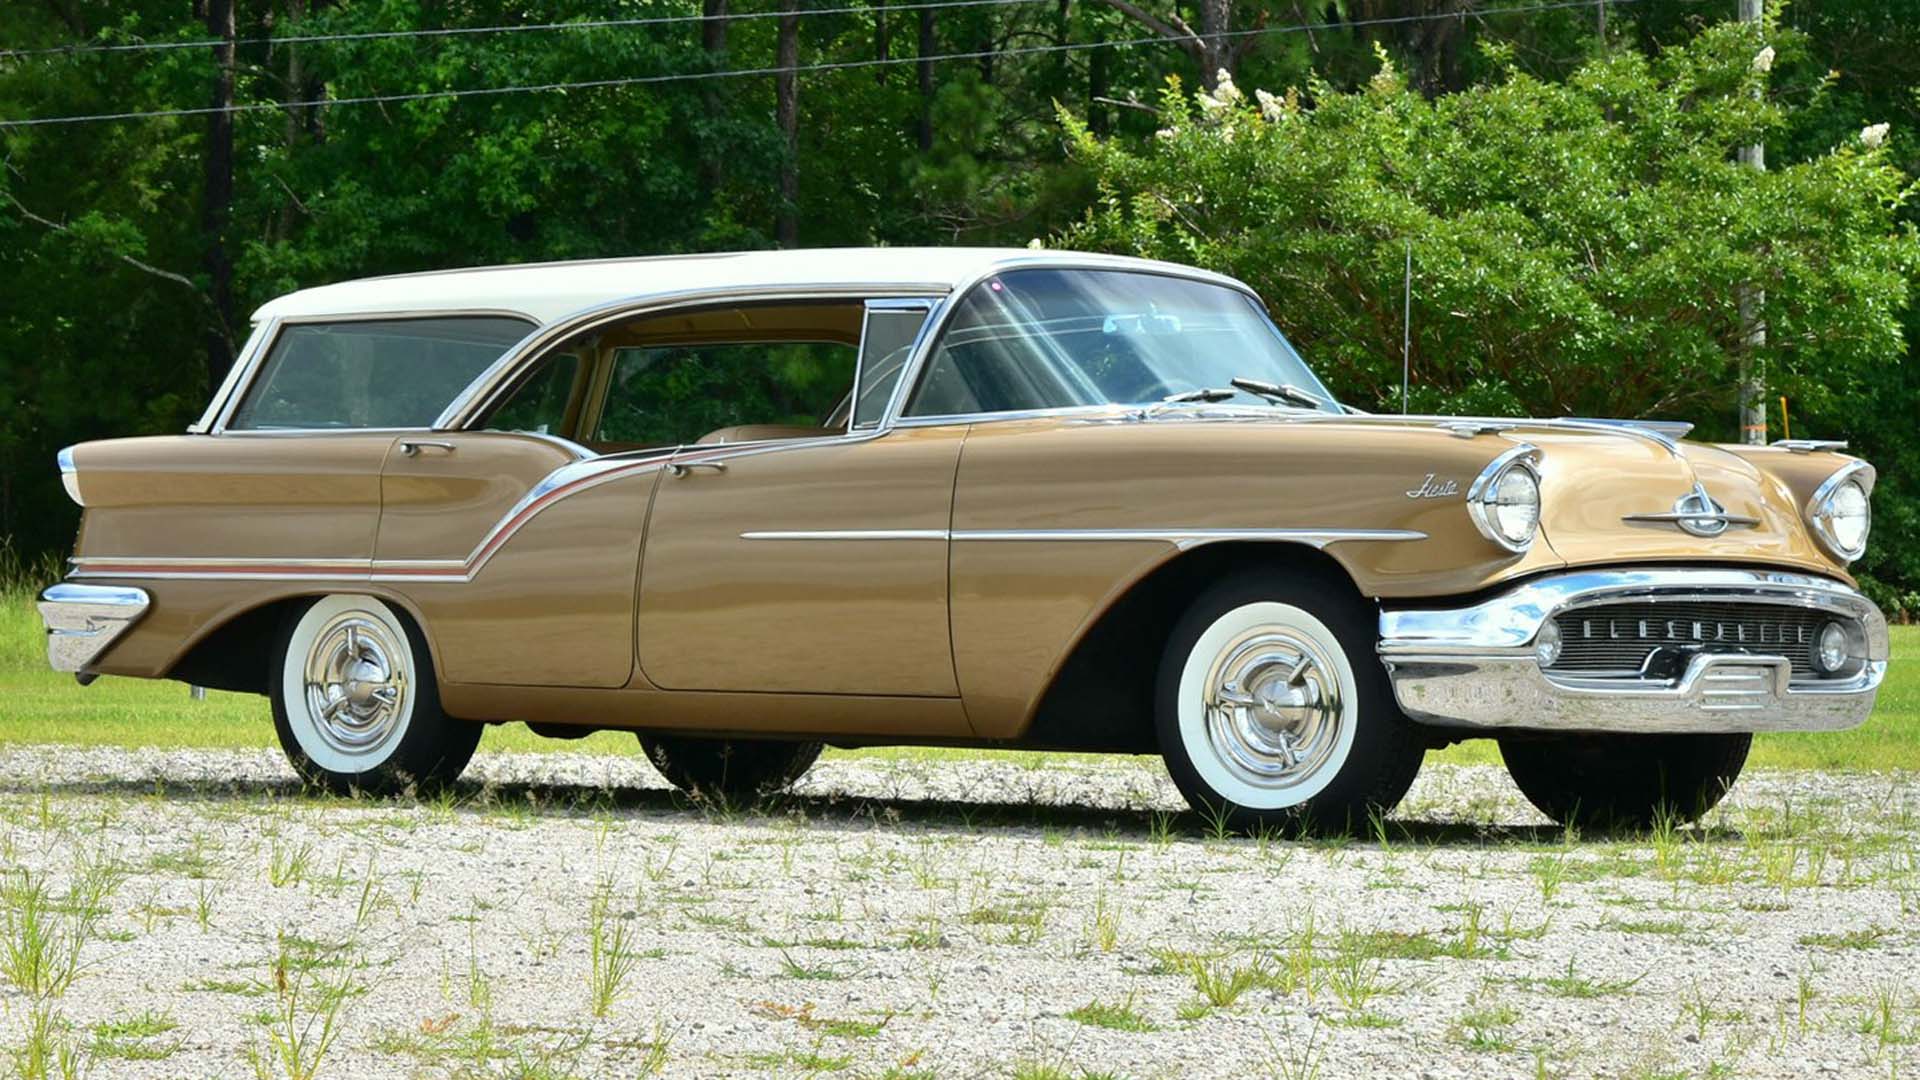 Take A Family Fiesta In This 1957 Oldsmobile Super 88 Station Wagon